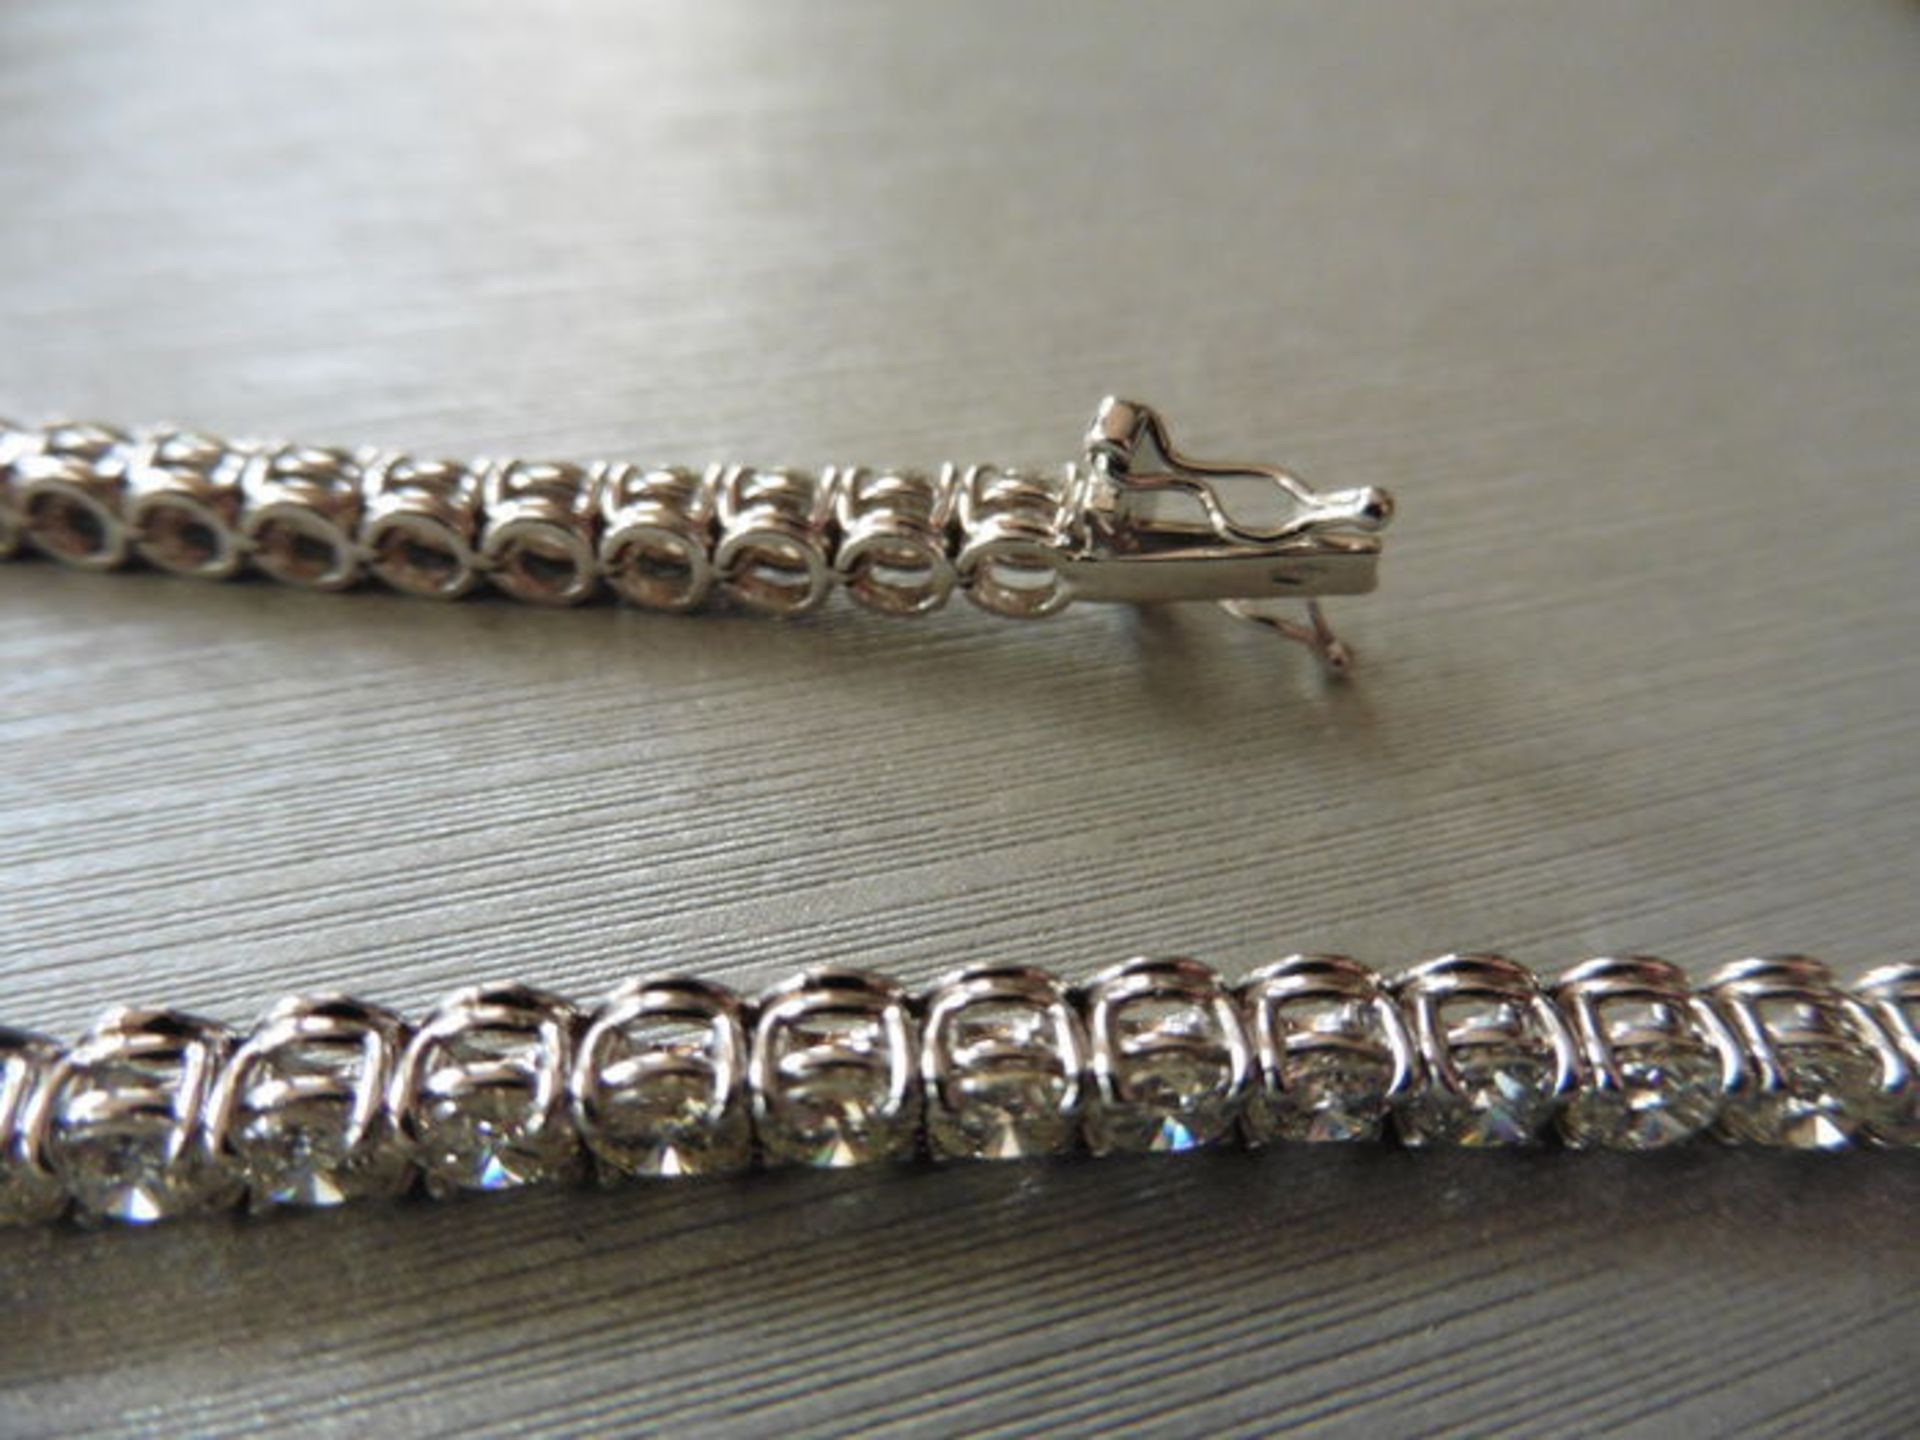 Diamond tennis bracelet set with brilliant cut diamonds of I colour, si3 clarity, weighing 10.20ct - Image 2 of 4